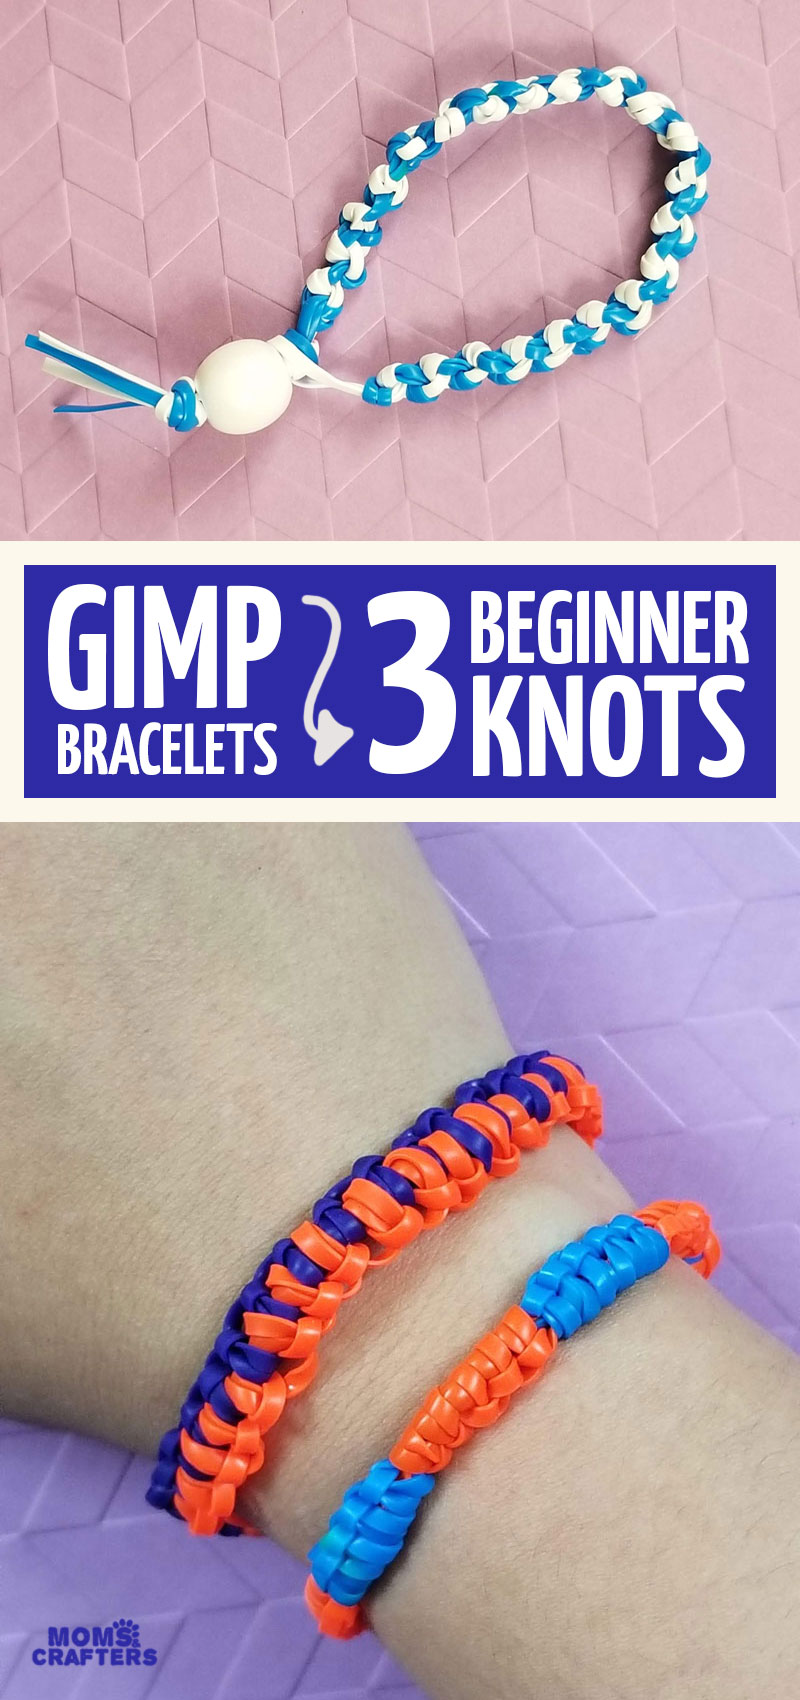 Gimp Bracelets – A Throwback to the 90s – The Skillful Meeple